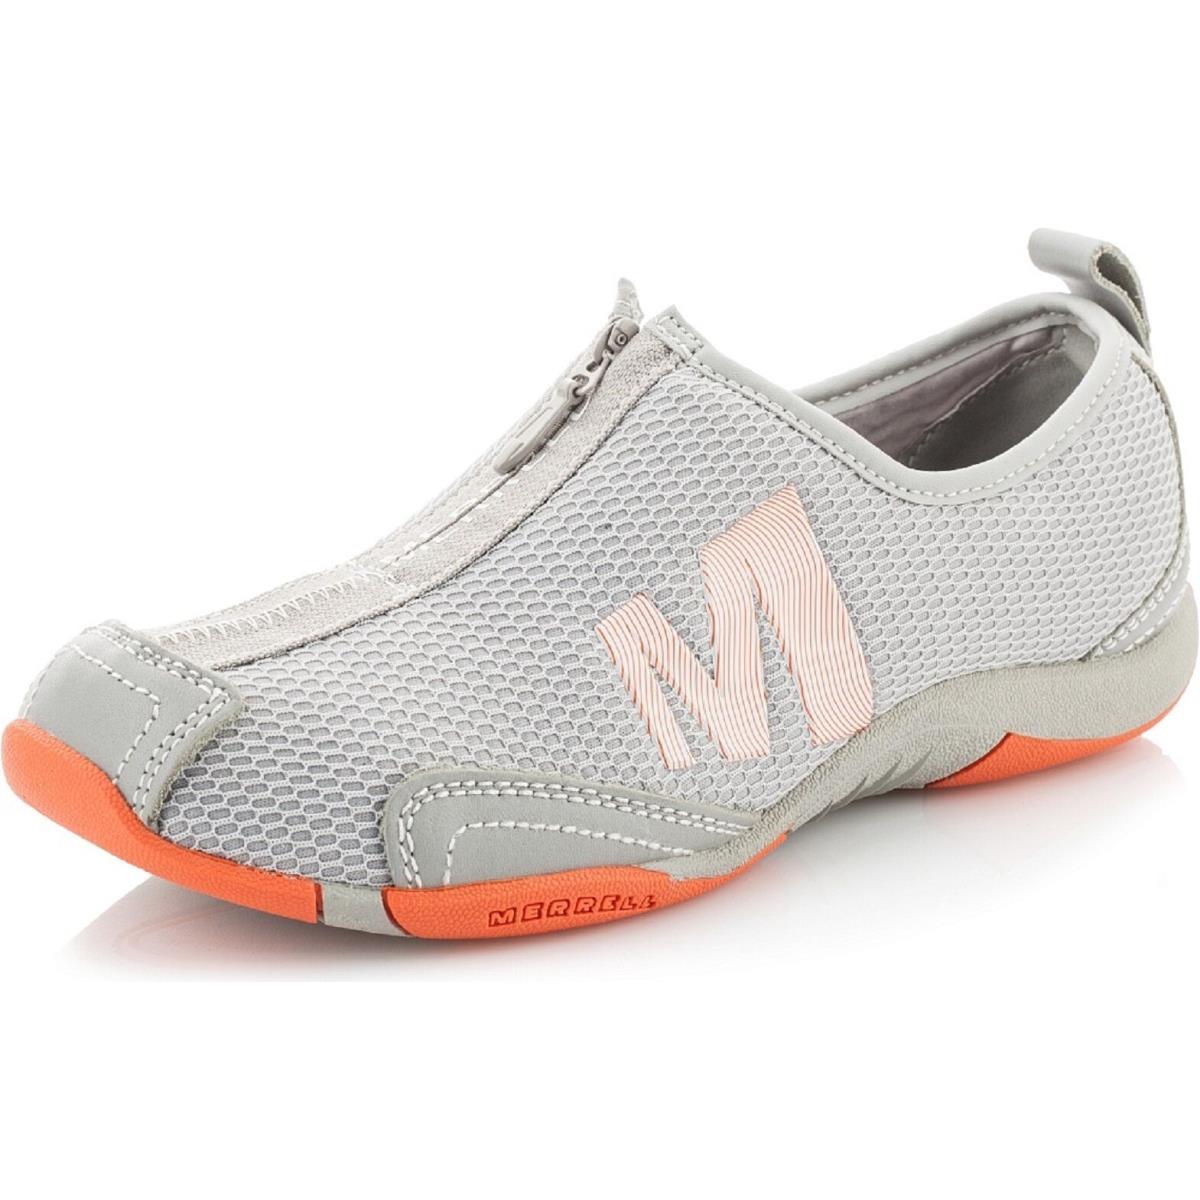 Womens Usa Size 5 Merrell Tamba Breeze Ash Gray Coral Athletic Casual Shoes